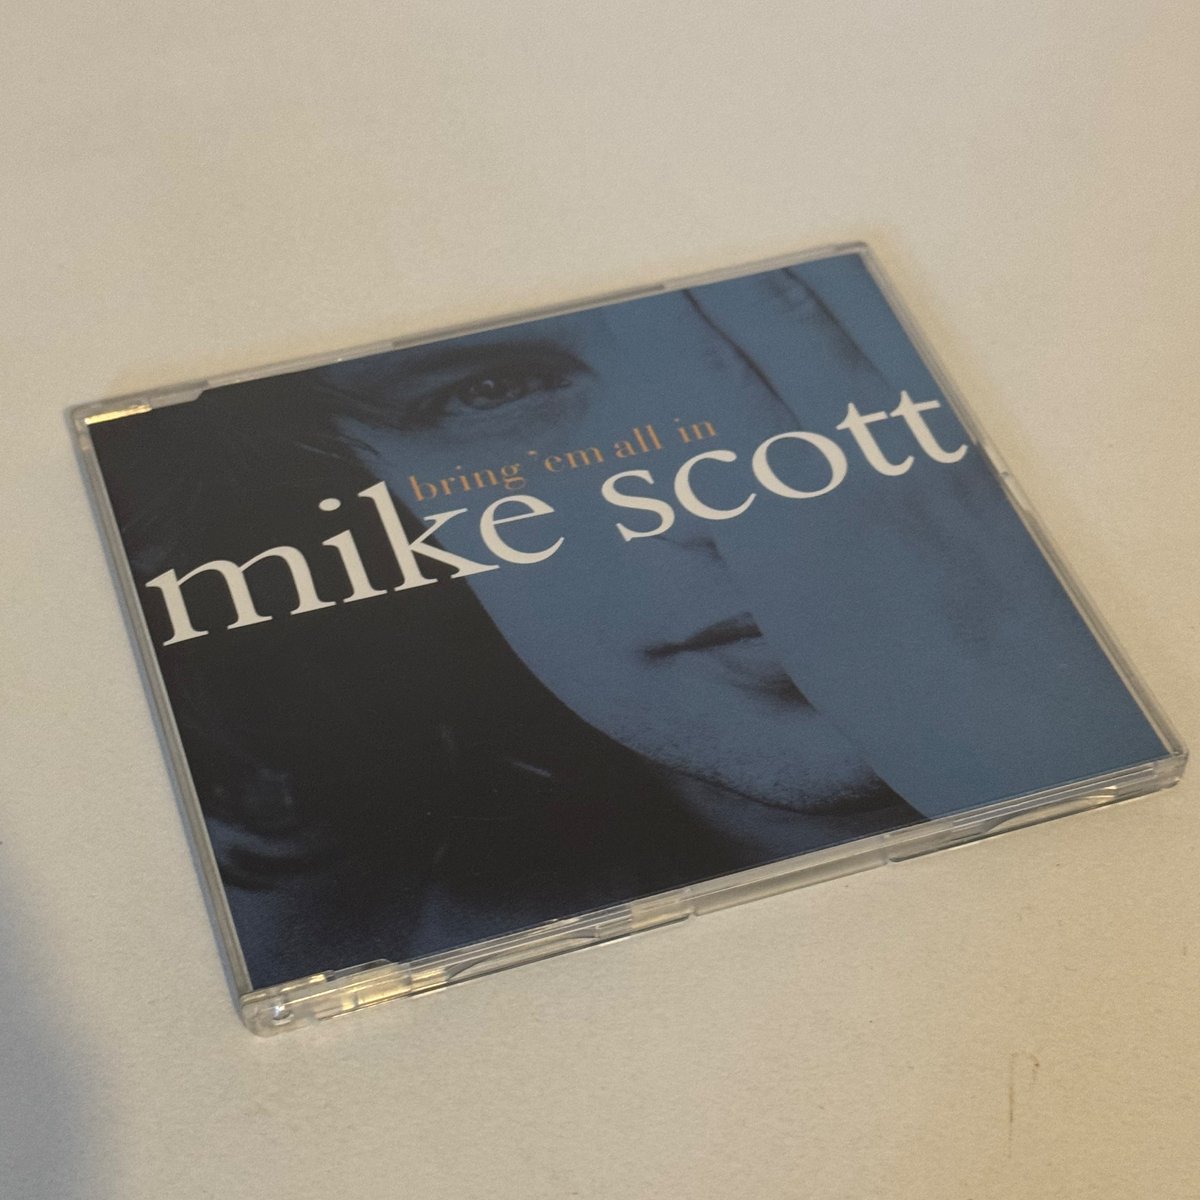 bring ‘em all in by Mike Scott

#TheWaterboys | #MikeScott